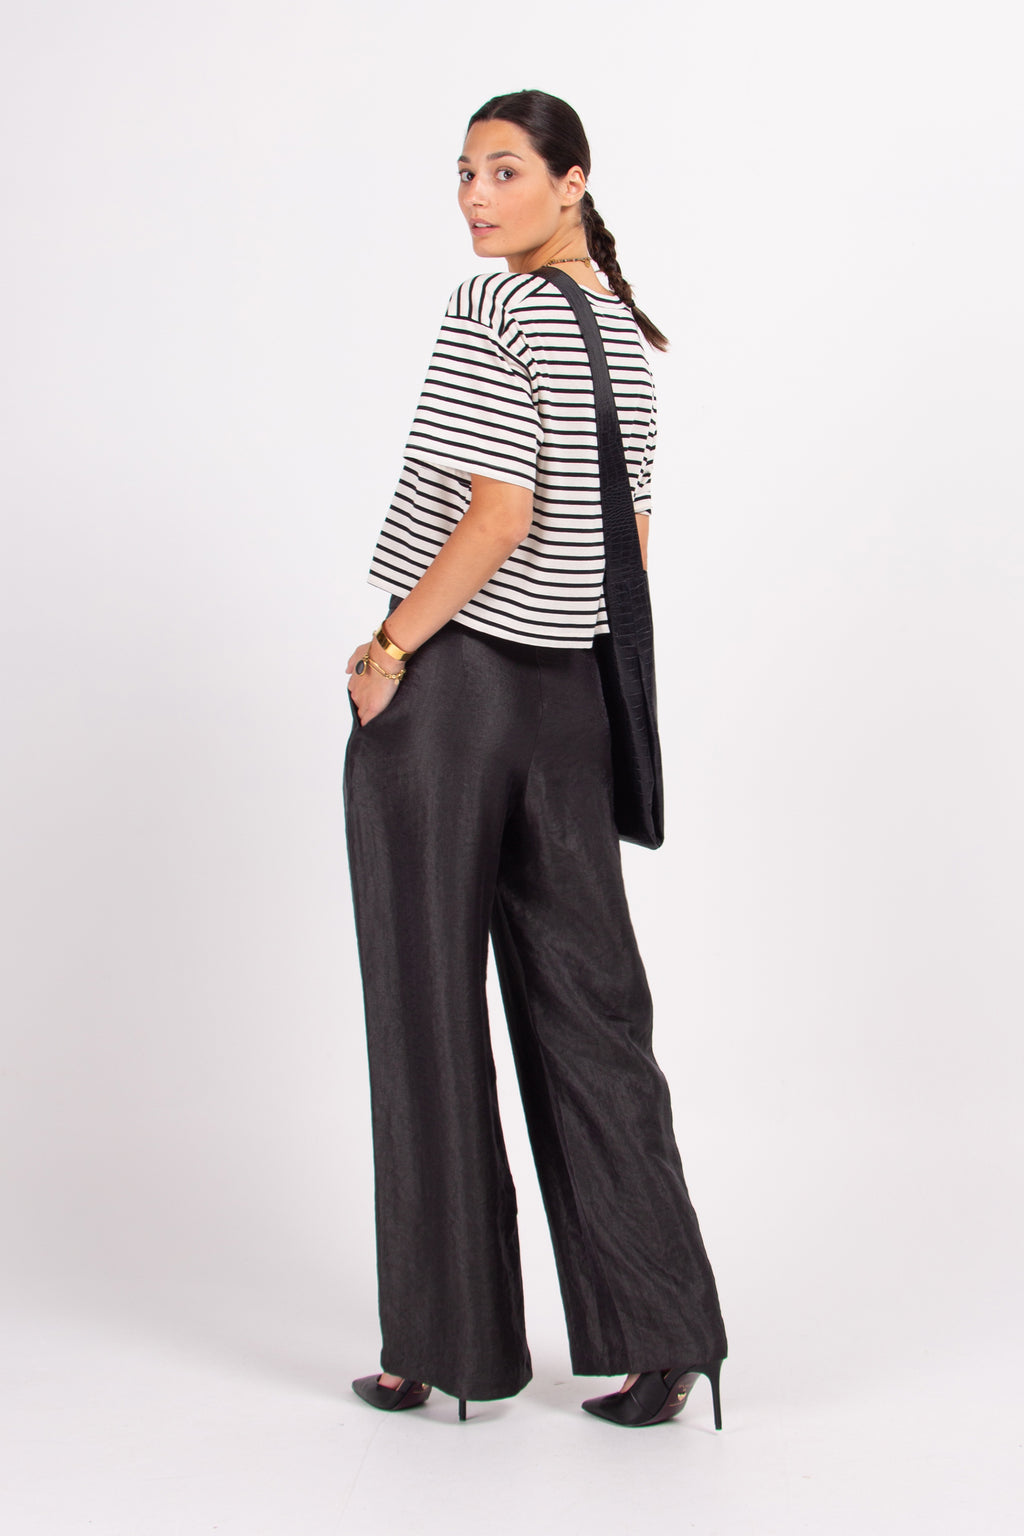 Castor trousers in shiny graphite